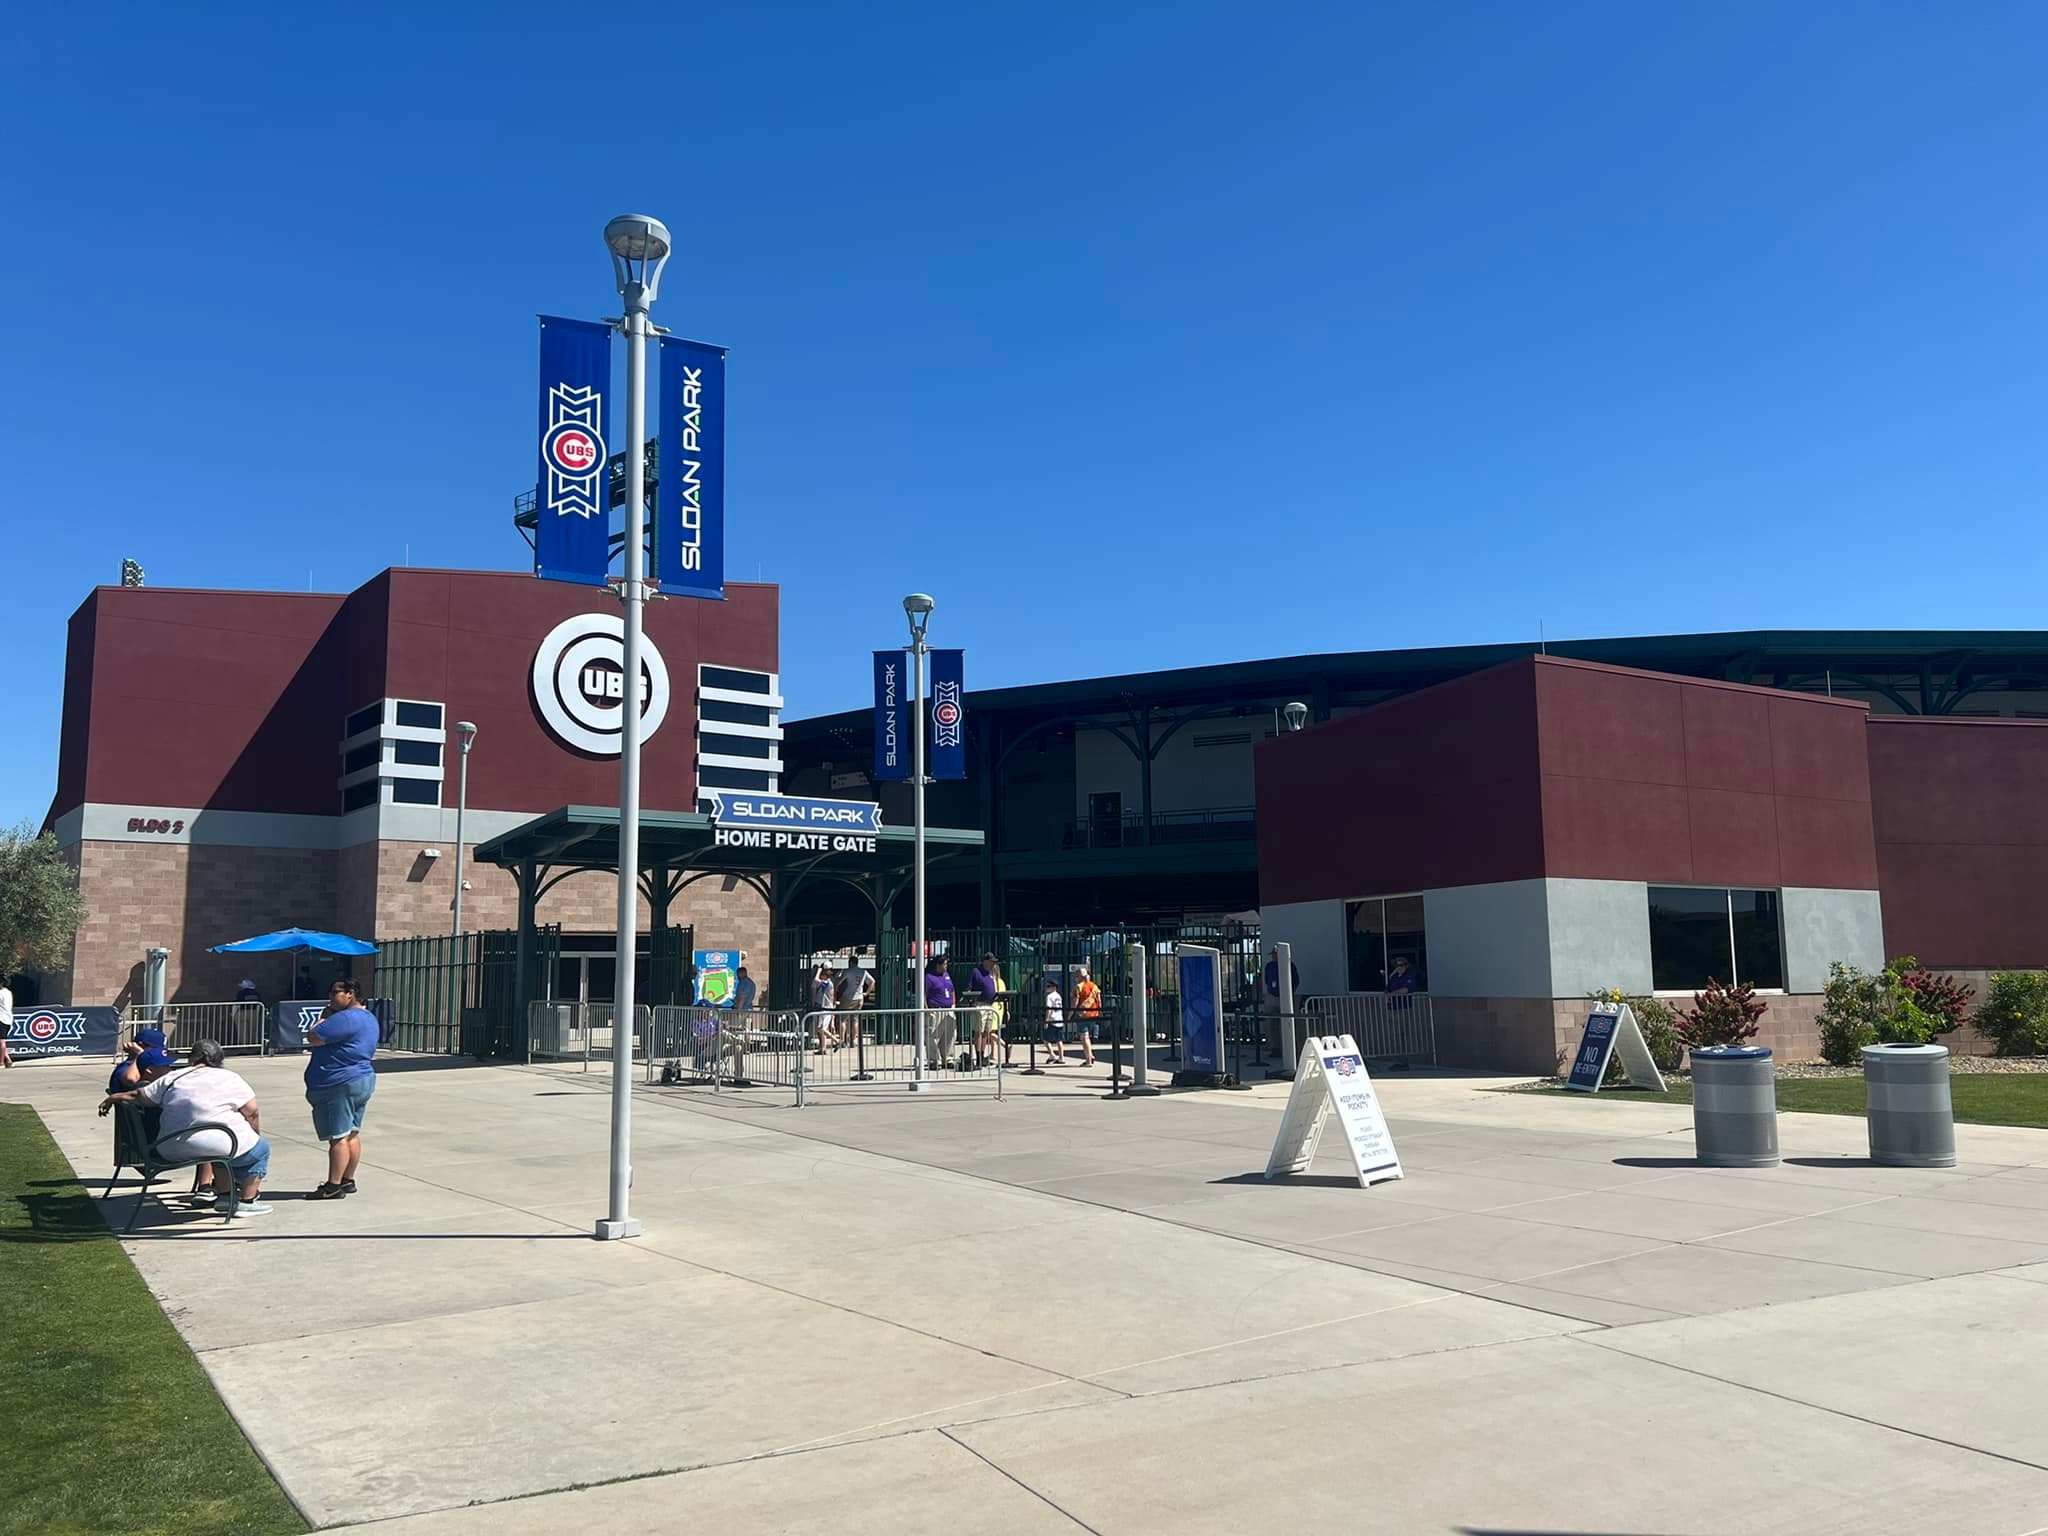 Sloan Park Review - Chicago Cubs - Ballpark Ratings